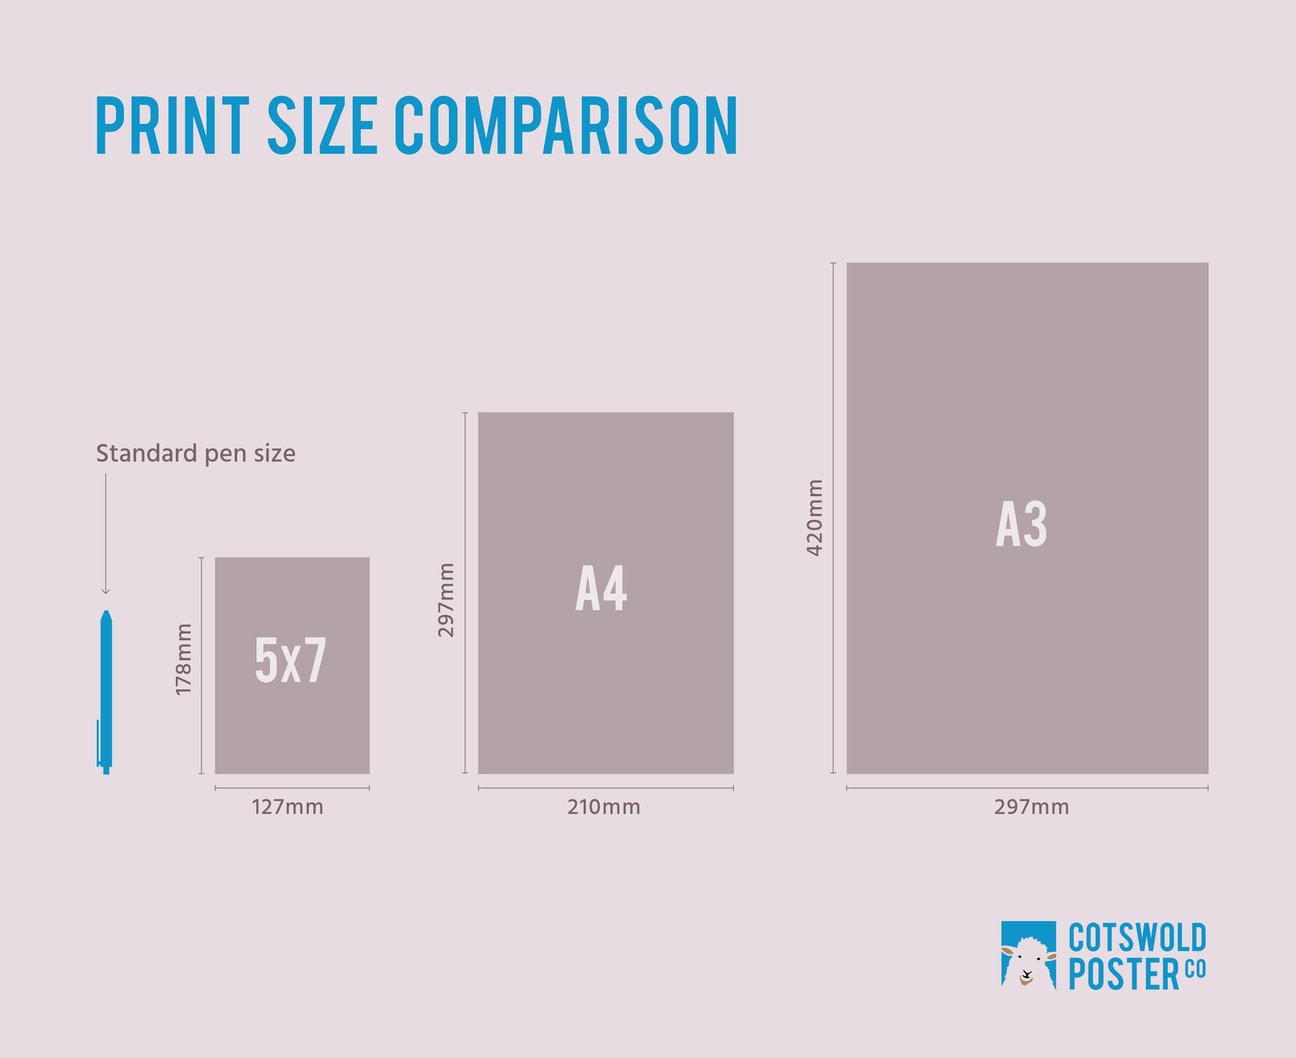 Compare sizes of the prints graphic